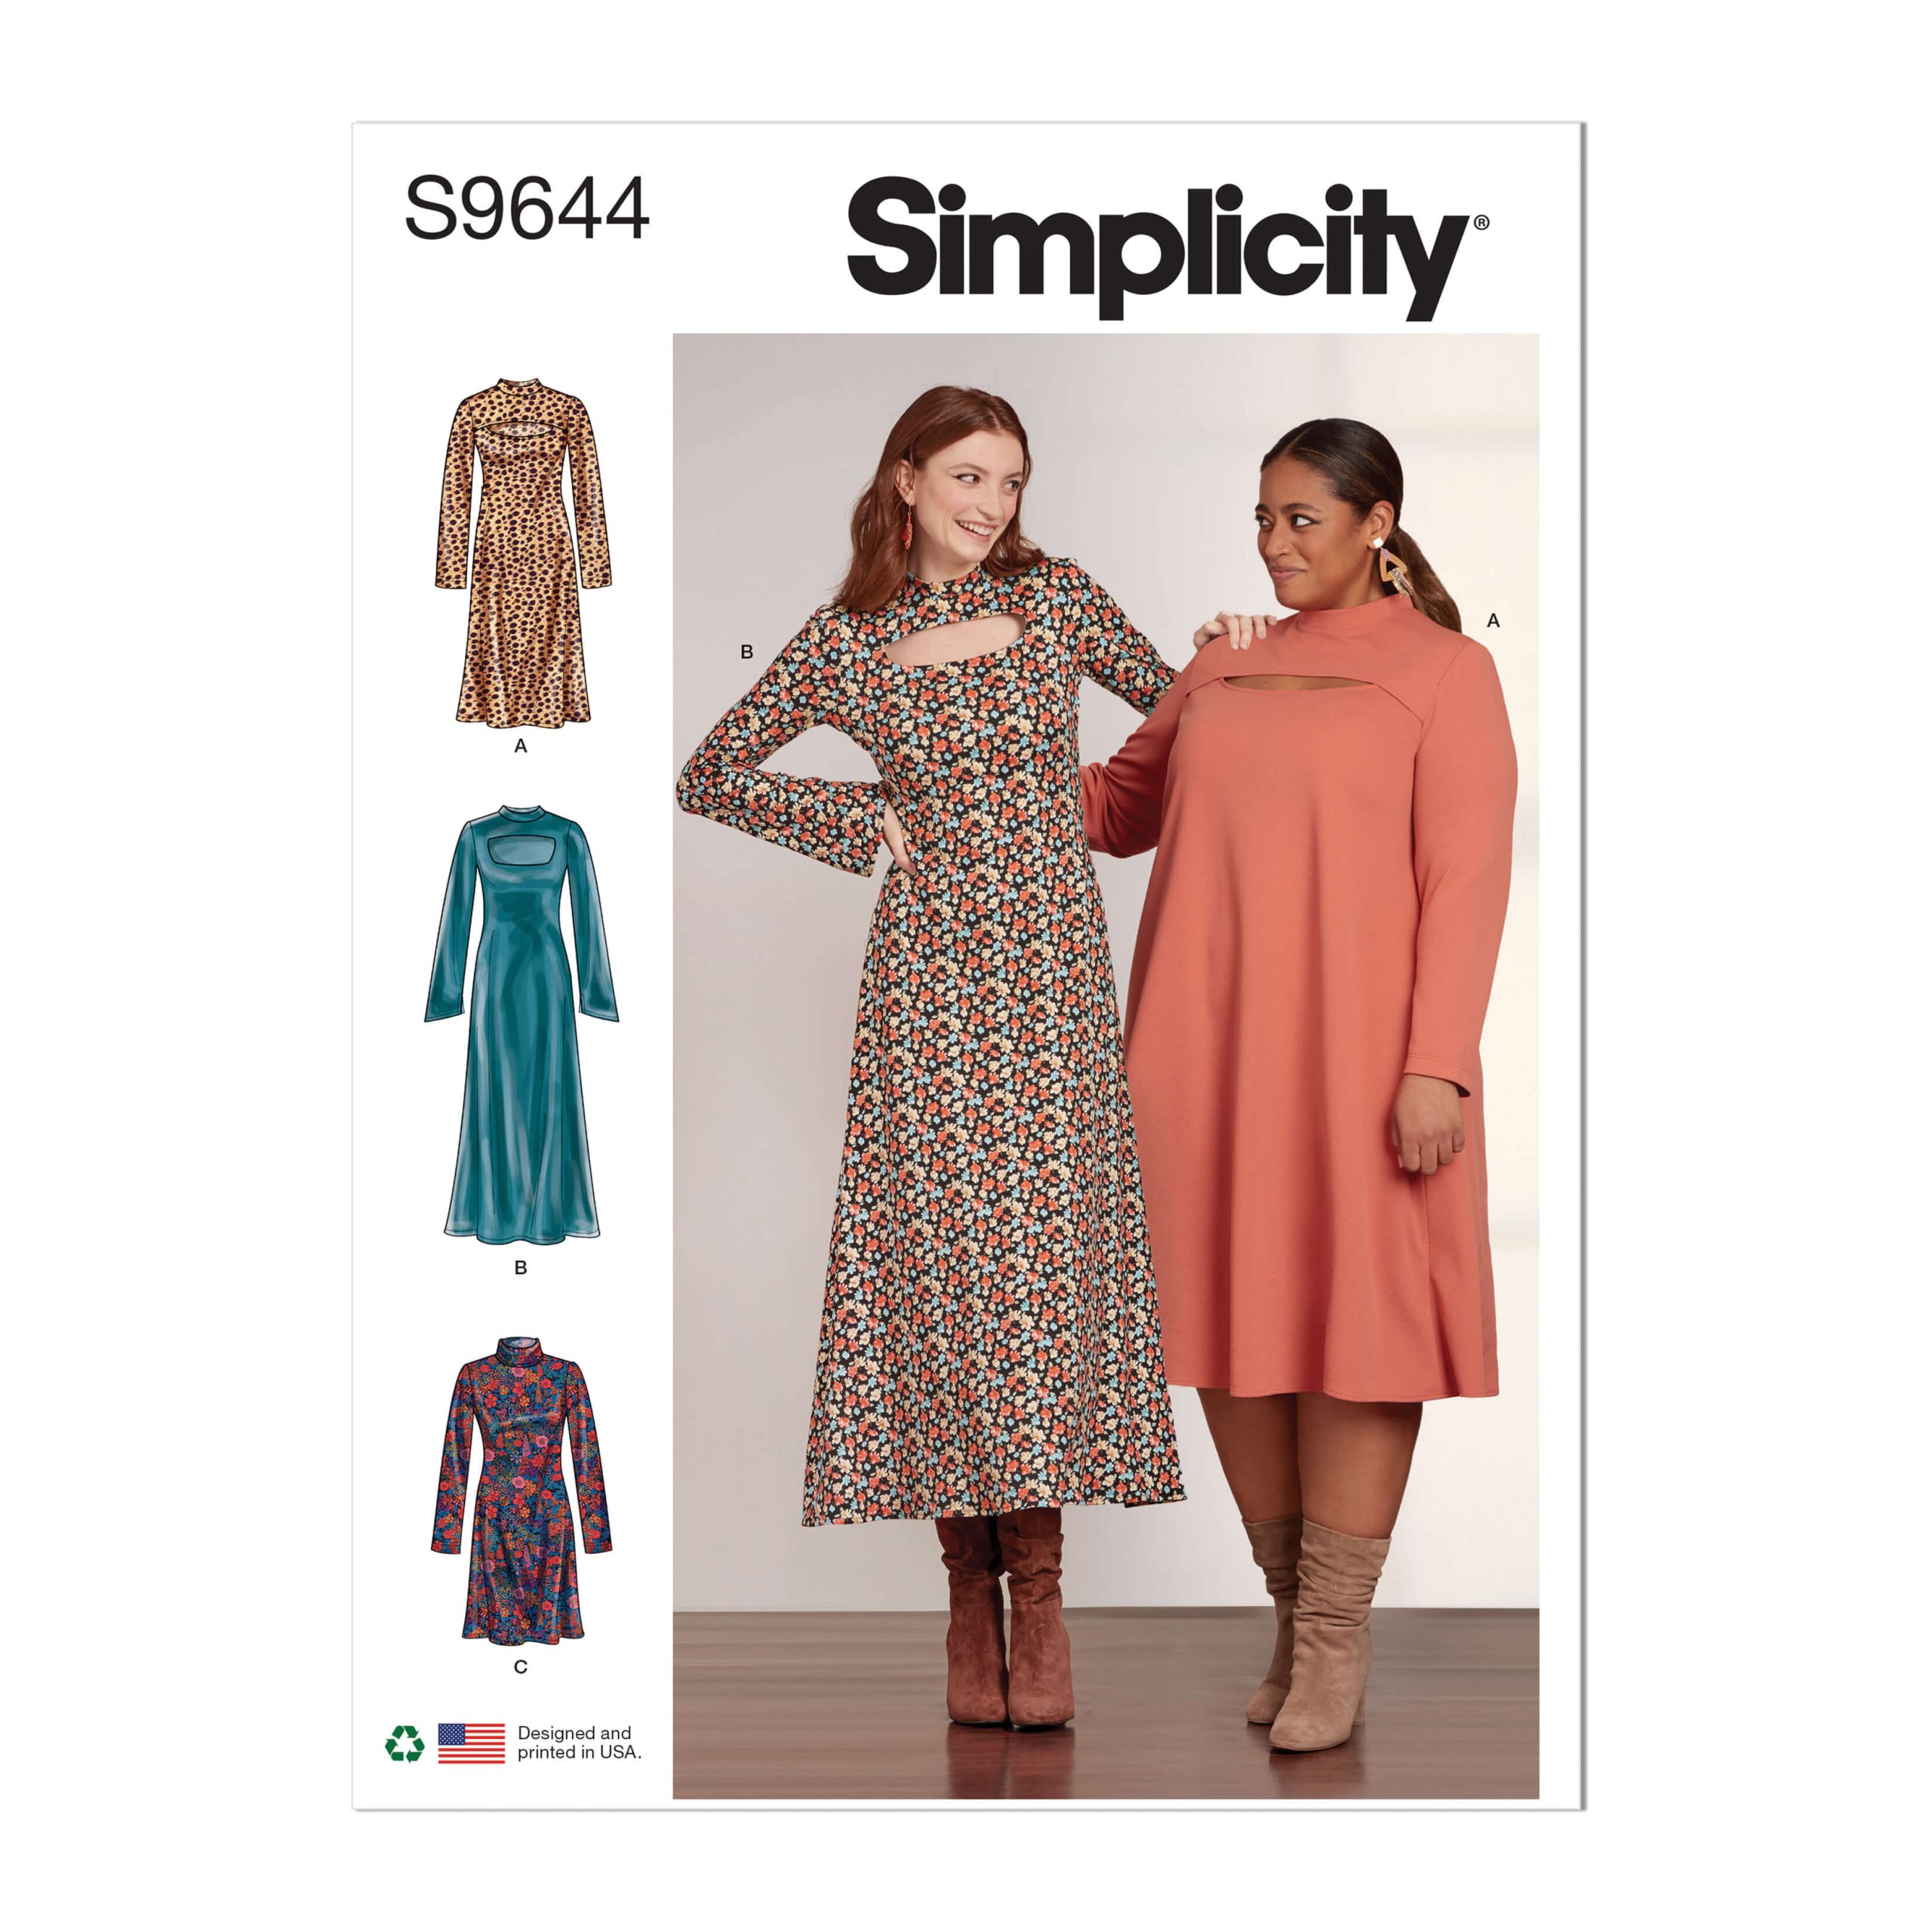 Simplicity Sewing Pattern S9644 Misses' and Women's Knit Dress